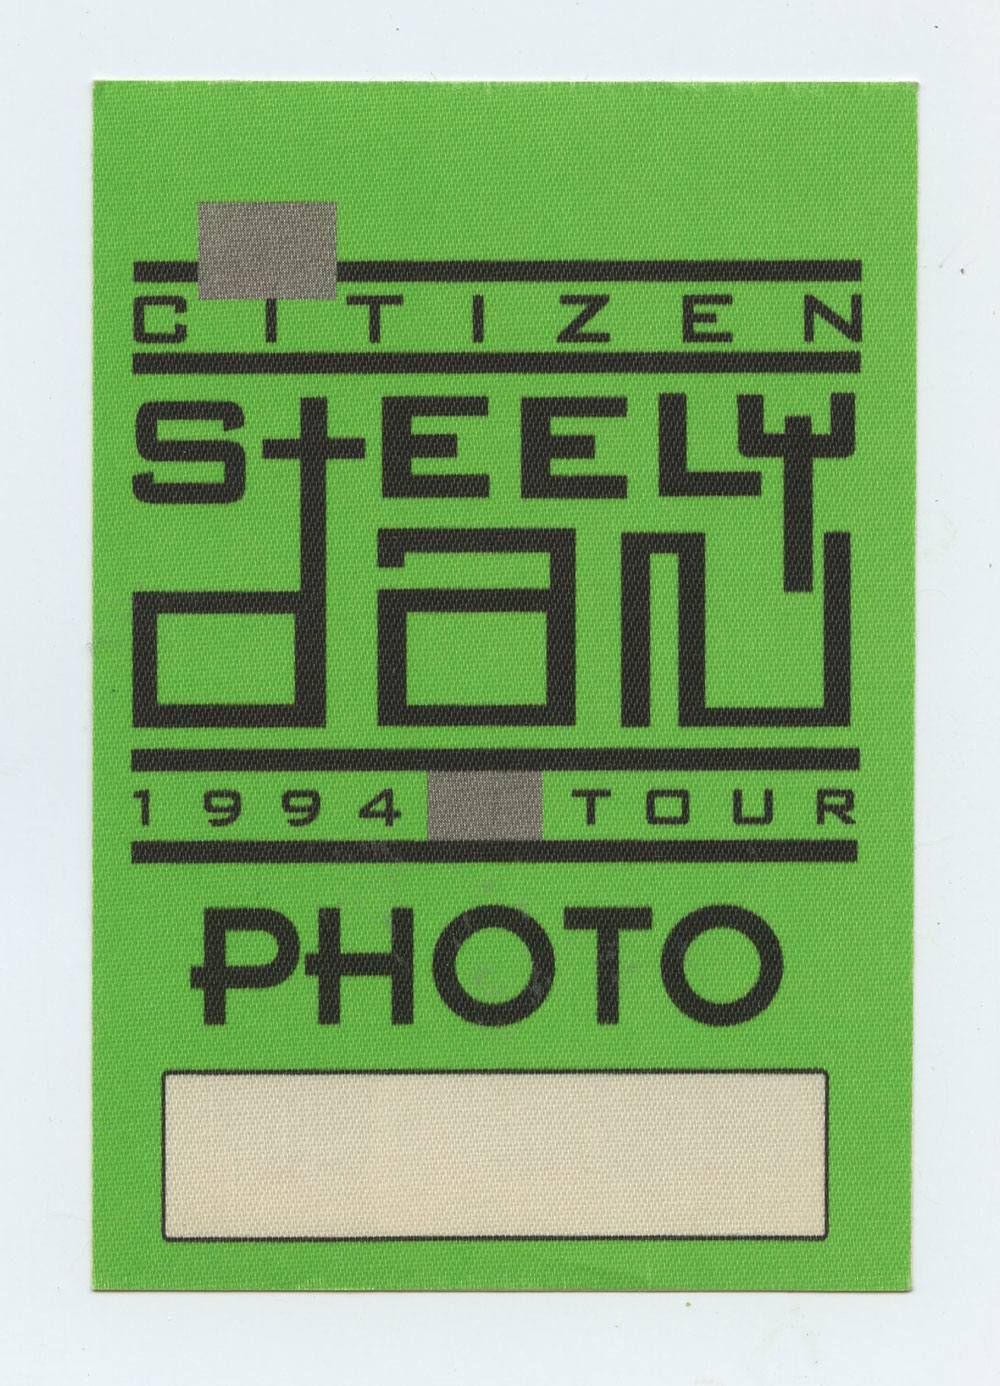 Steely Dan Backstage Pass 1994 Tour